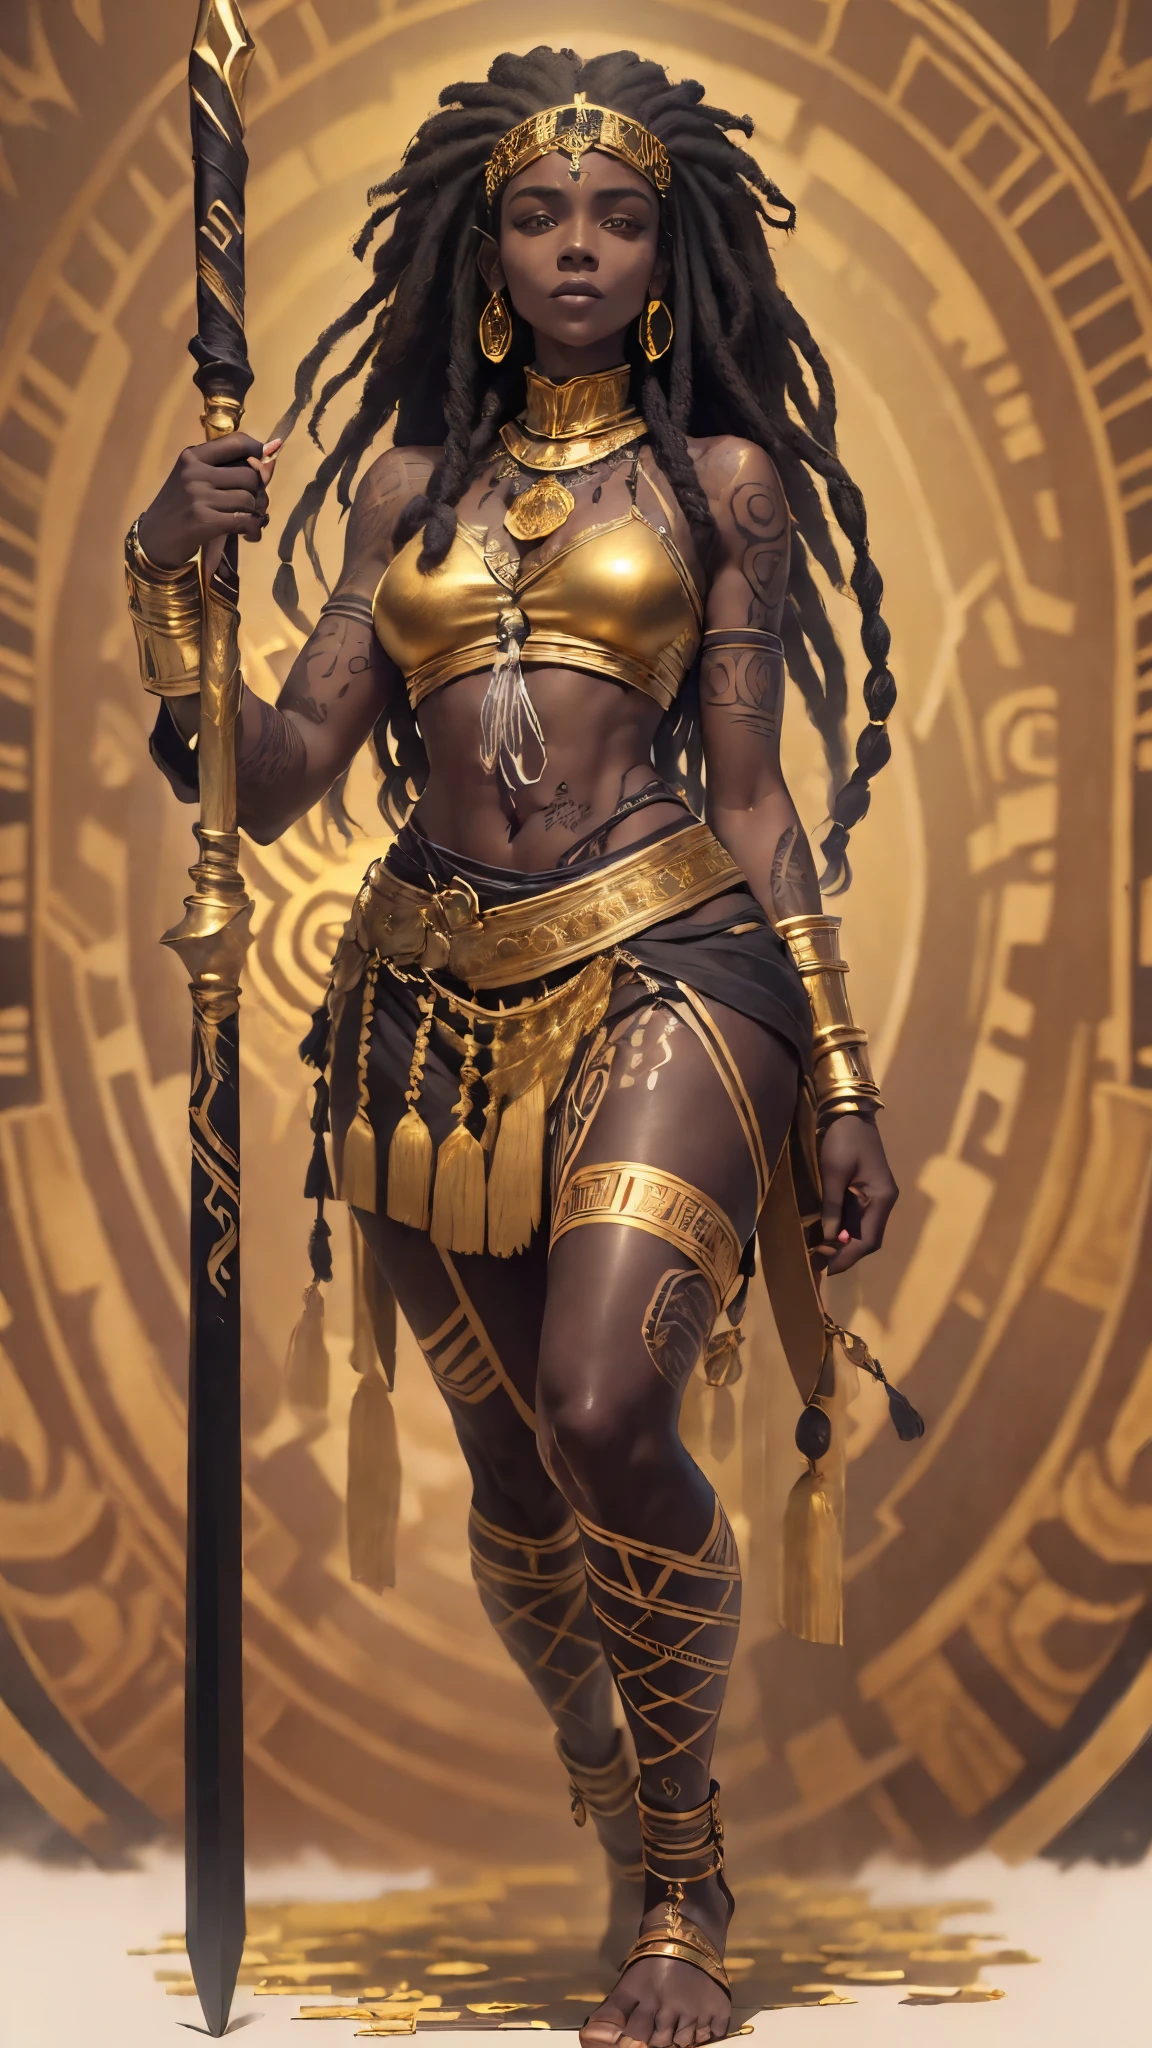 (full body:2), Top quality, Intricate details , (Fine skin, Shiny skin, Shiny hair, Pale complexion), A ebony woman, ((standing holding a spear)), (happyness look:1.4), (wearing black and golden battle outfit:1.8), (long dreadlock hairstyle:1.3), (reflective eyes:1.3), (tribal tattoo:1.5), looking at the viewer, full length image, (From the feet to the top of the head:1.6).